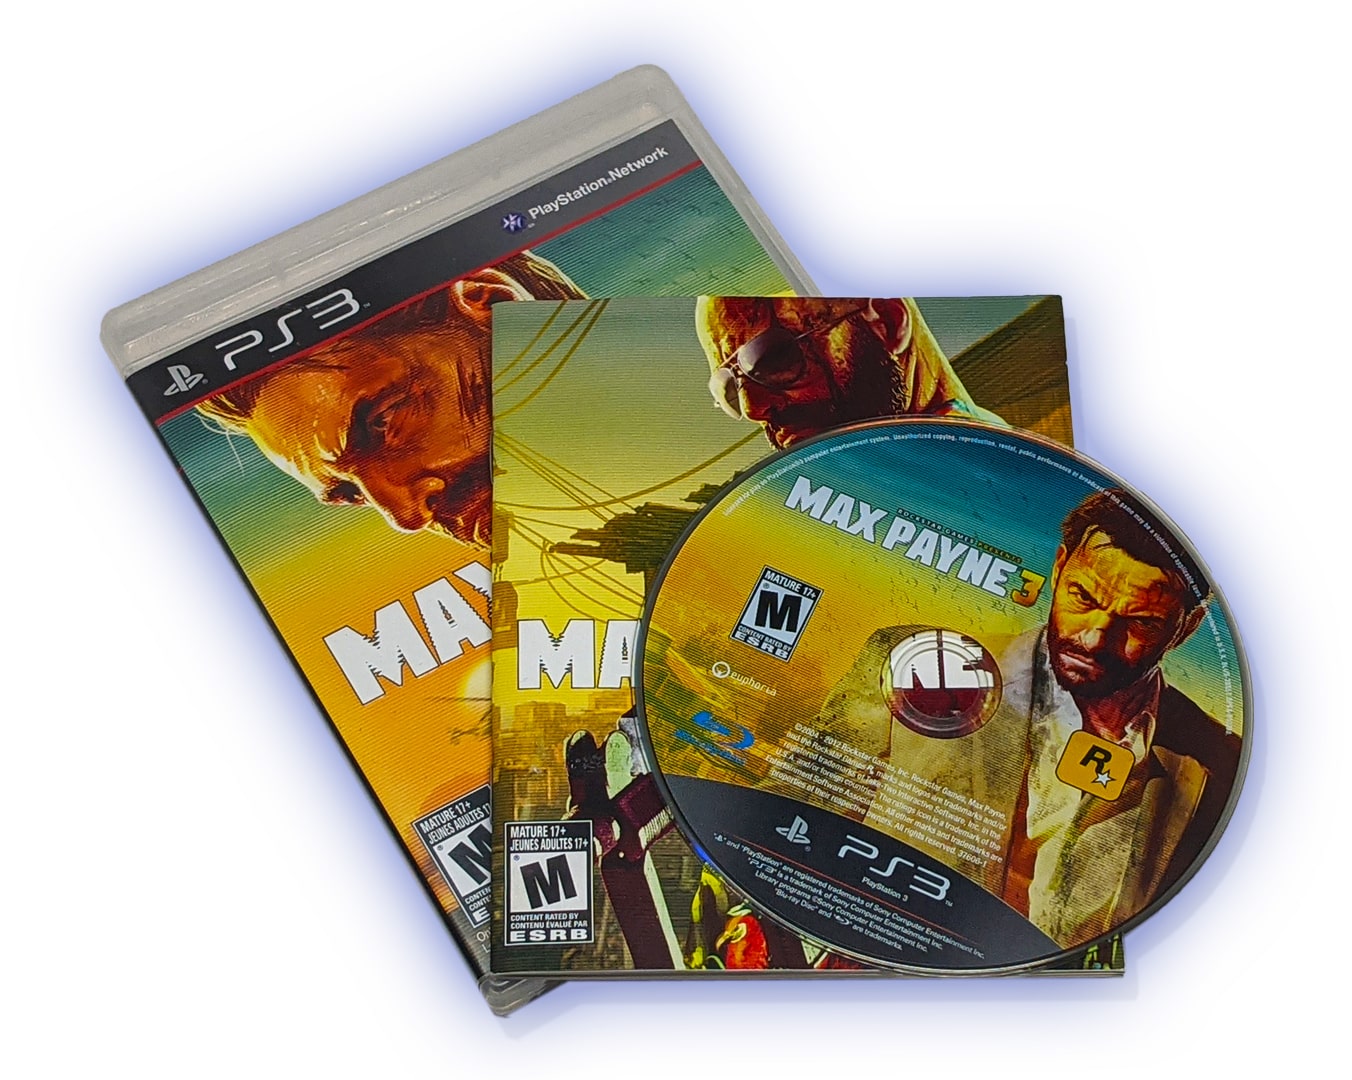 Max Payne 3 | PlayStation 3 | Case, Manual and Disc